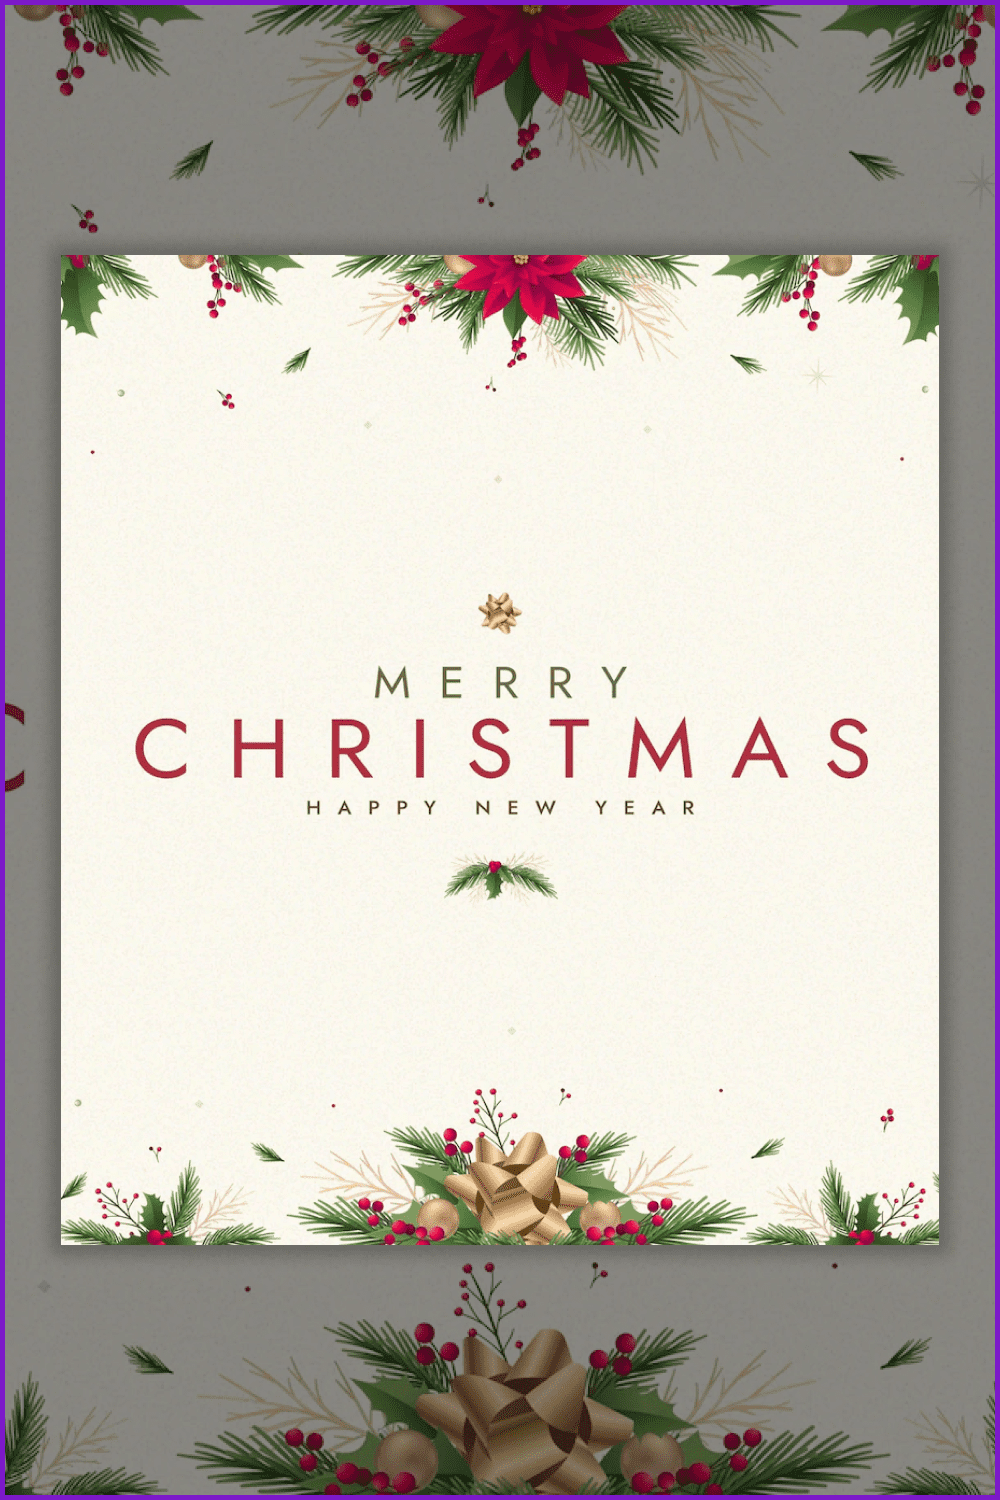 Merry Christmas wishes on a beige background with fir branches and flowers.